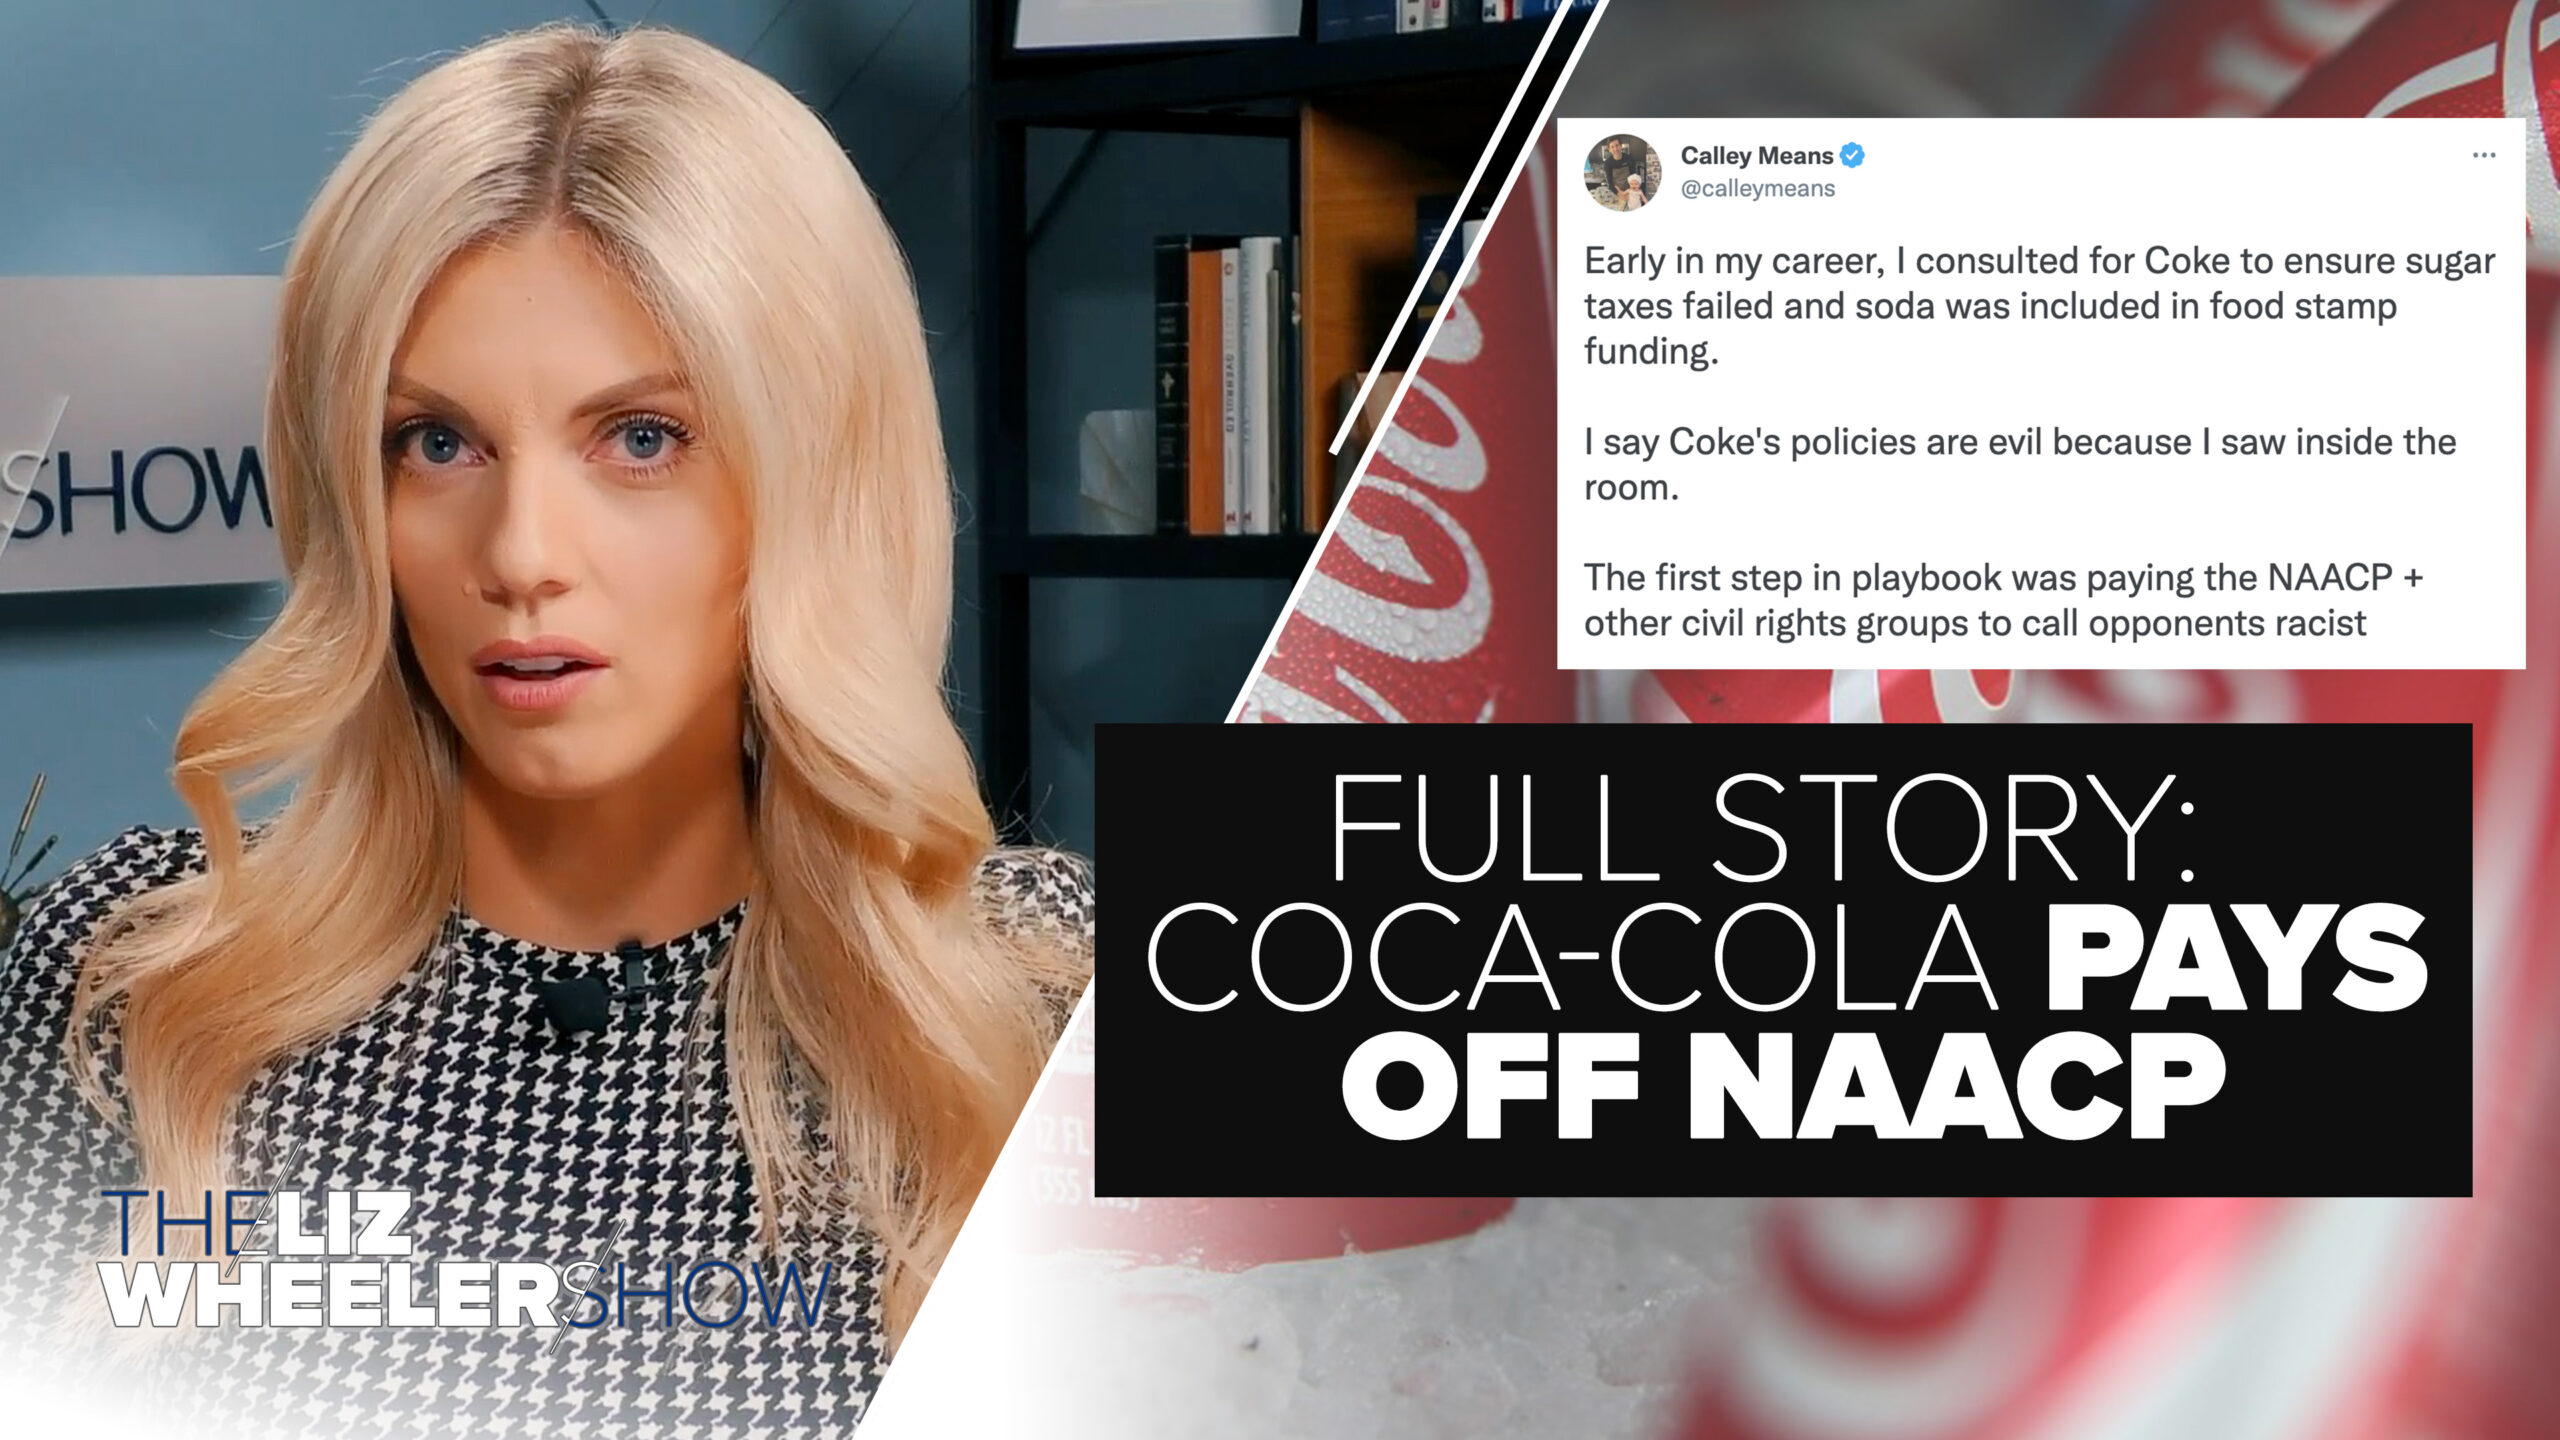 Tweet overlayed onto an image of Coca-Cola cans reveals how the company paid off the NAACP